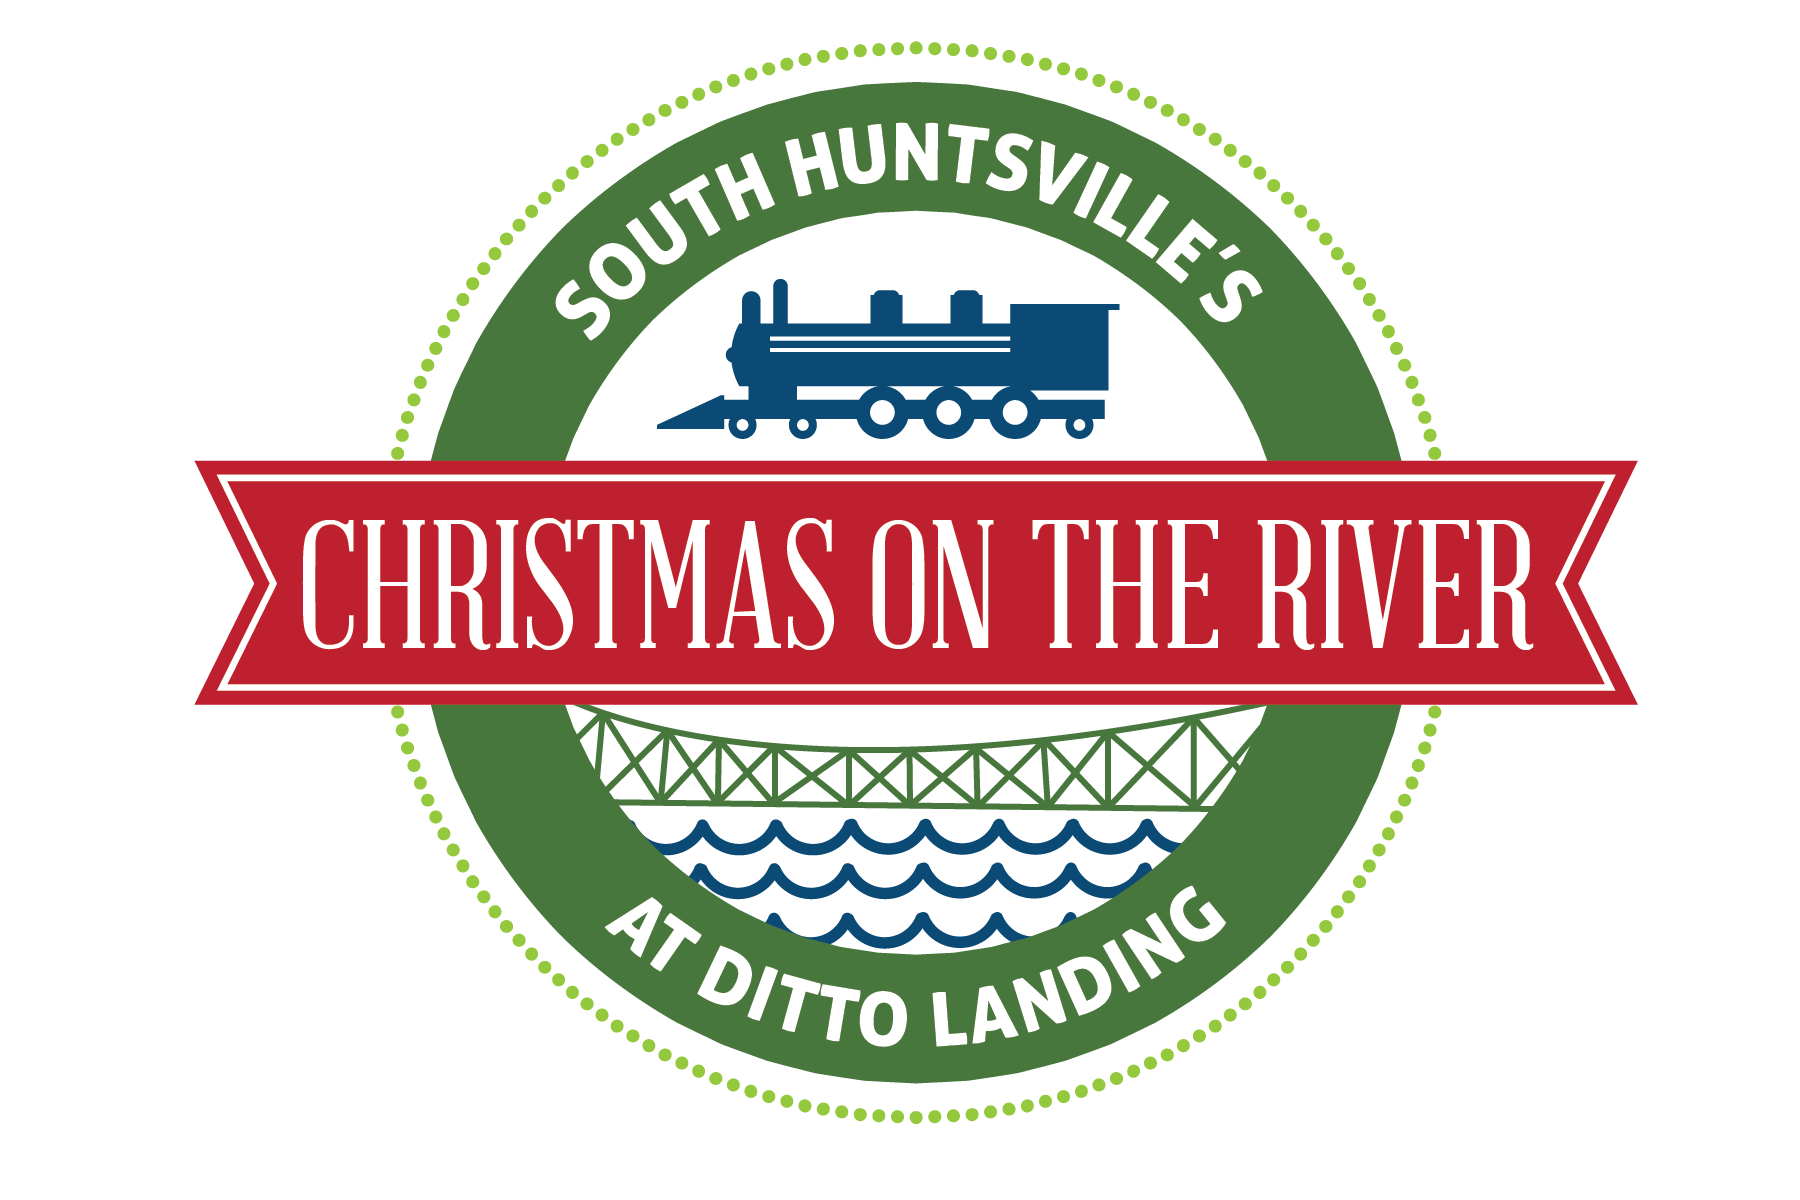 South Huntsville's Christmas on the River at Ditto Landing